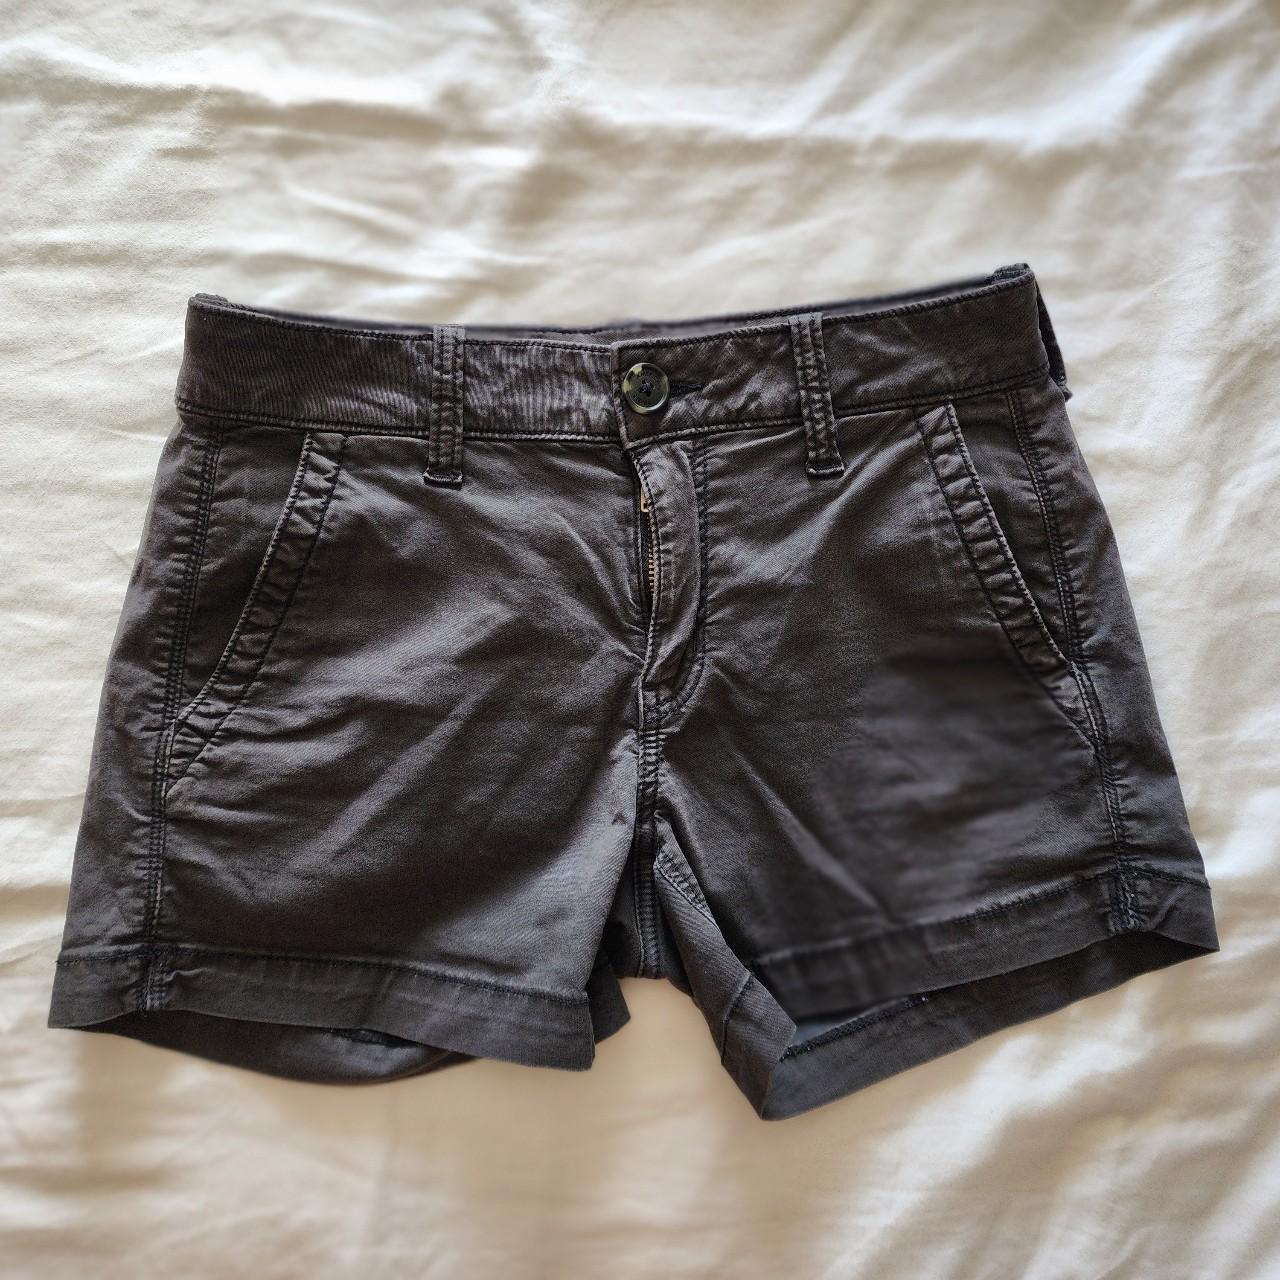 American Eagle Outfitters Women's Black Shorts | Depop